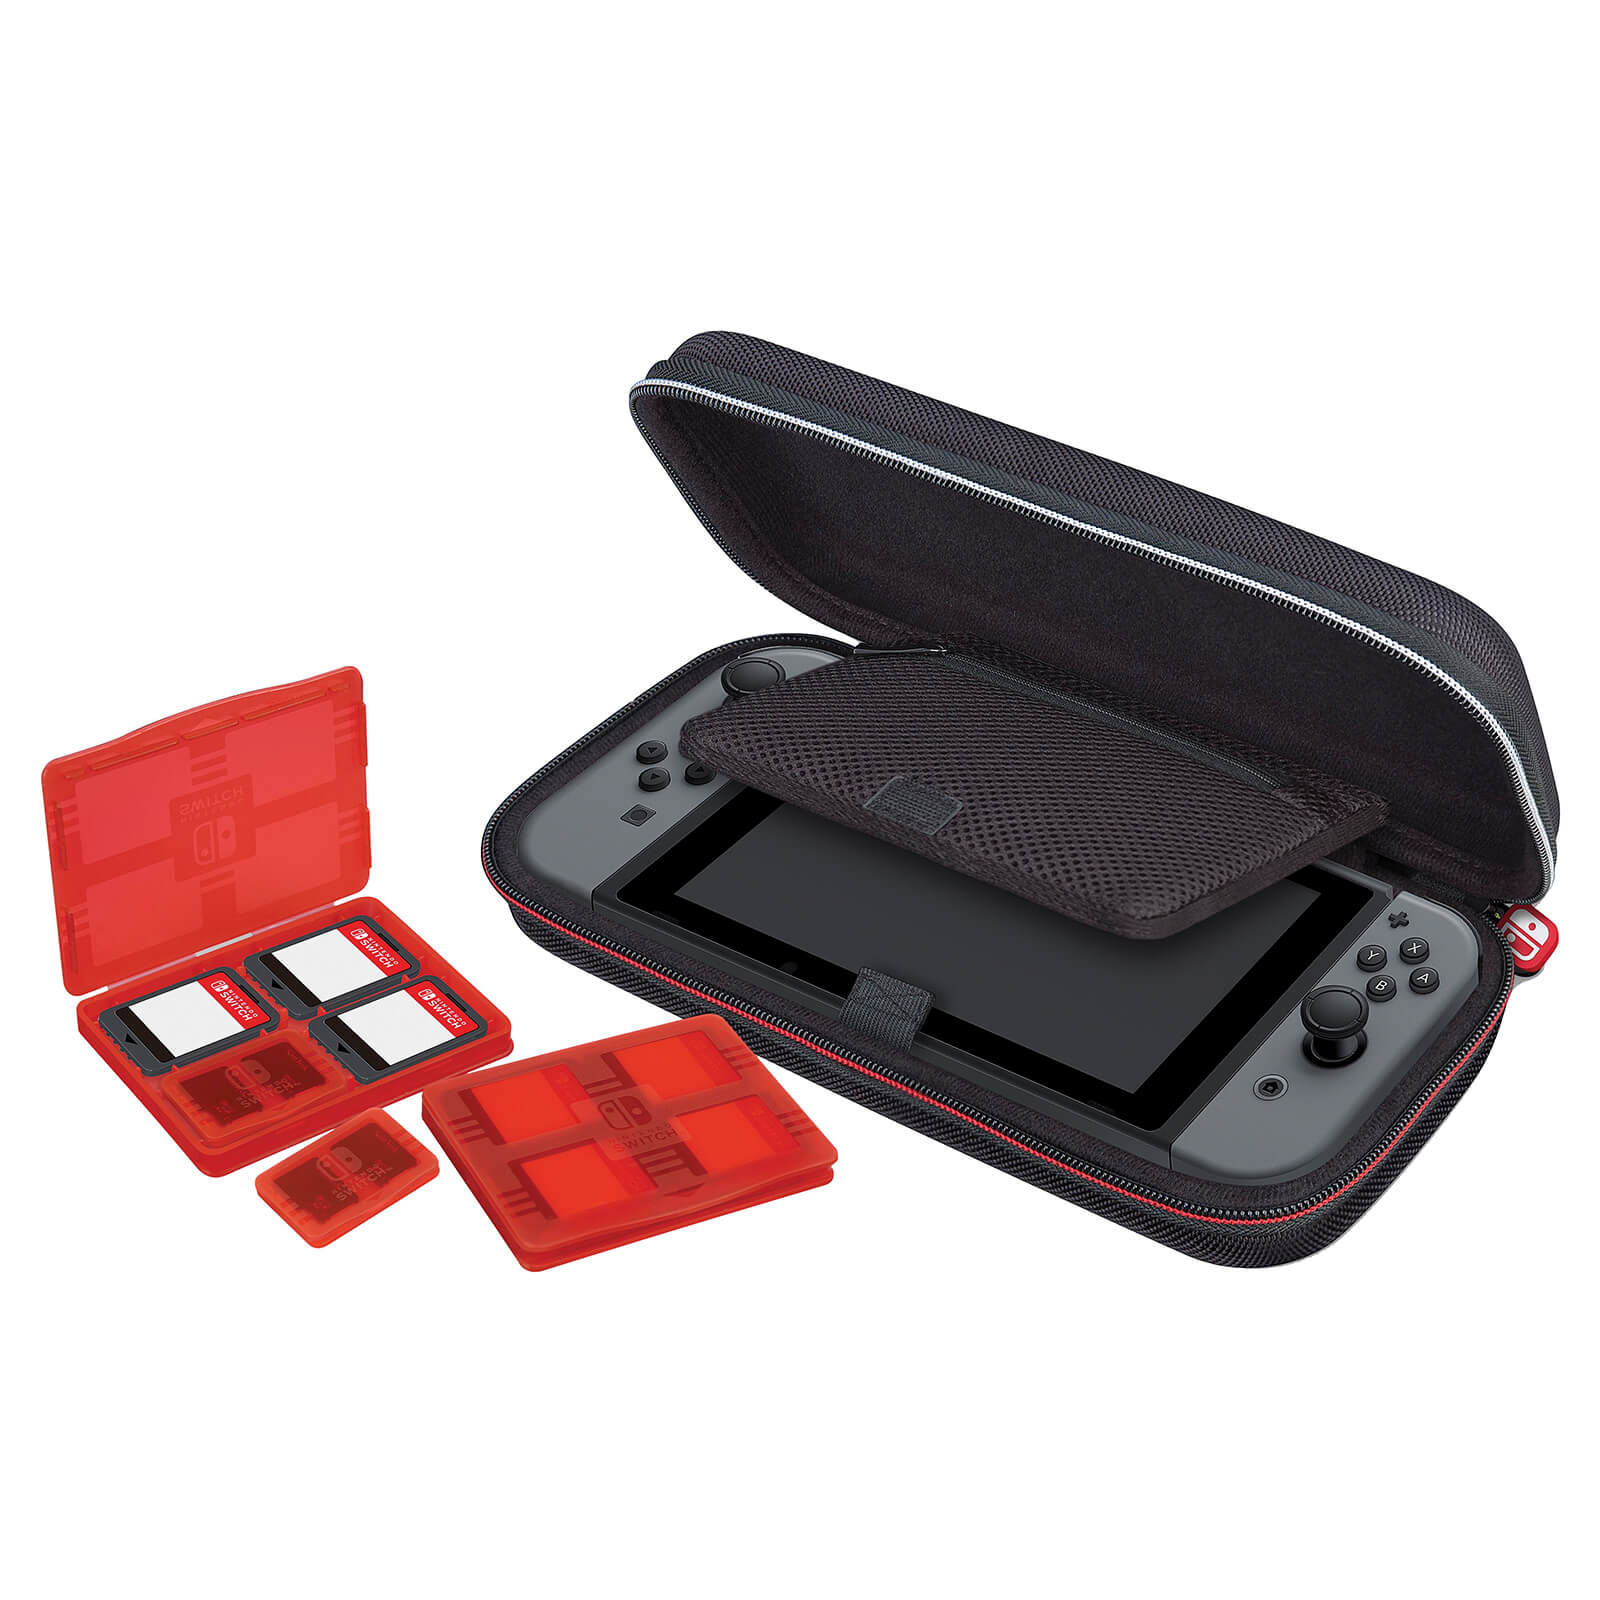 official switch case